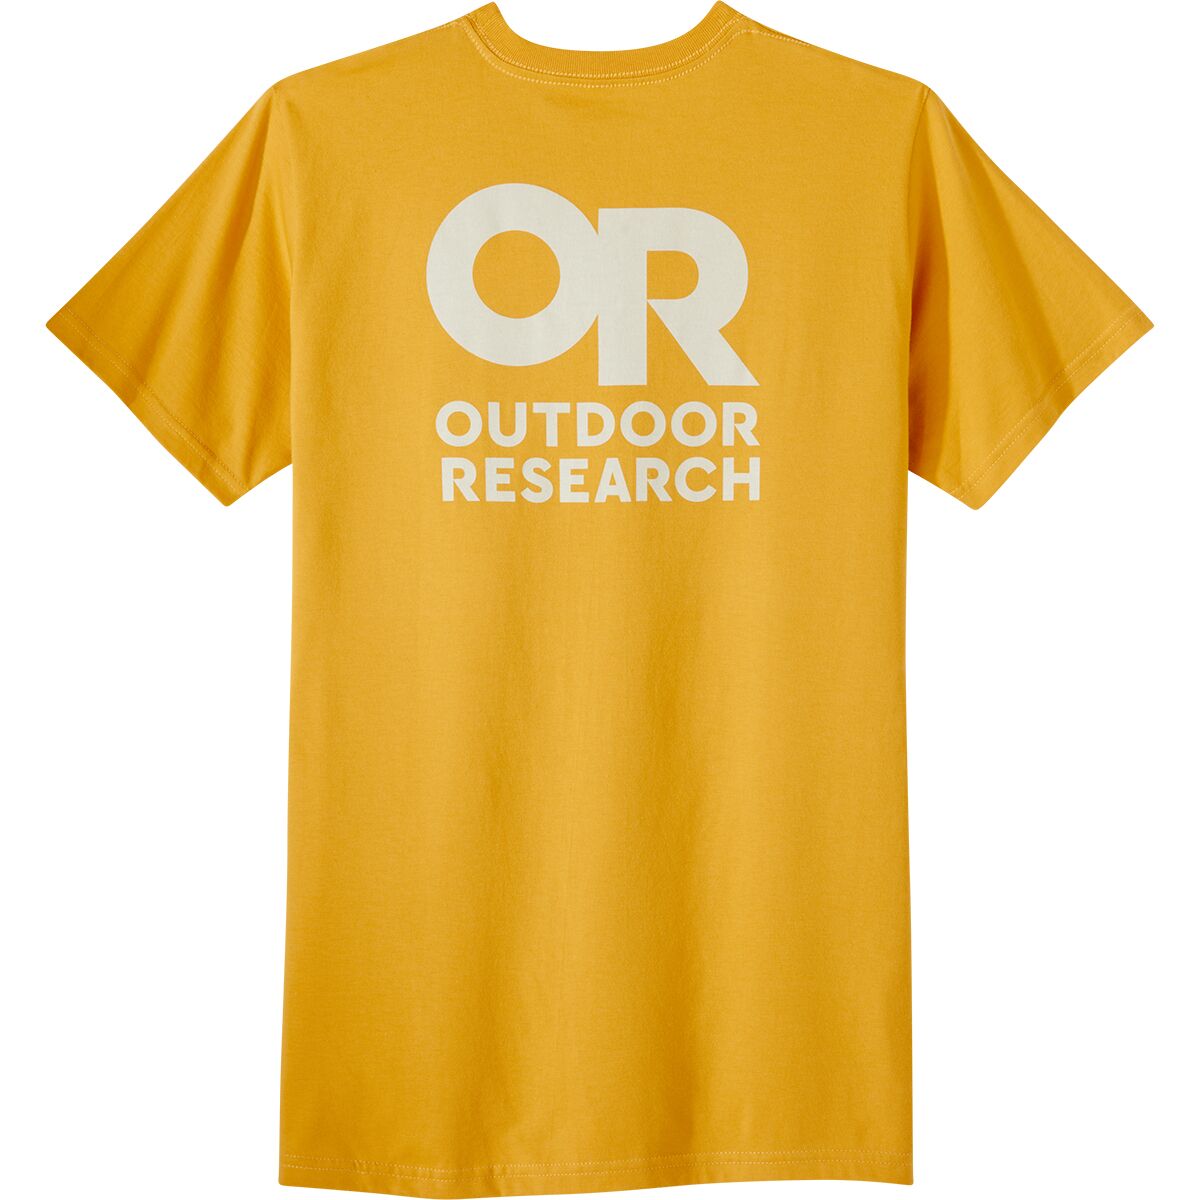 Outdoor Research Lockup Back Logo T-Shirt - Men's - Clothing